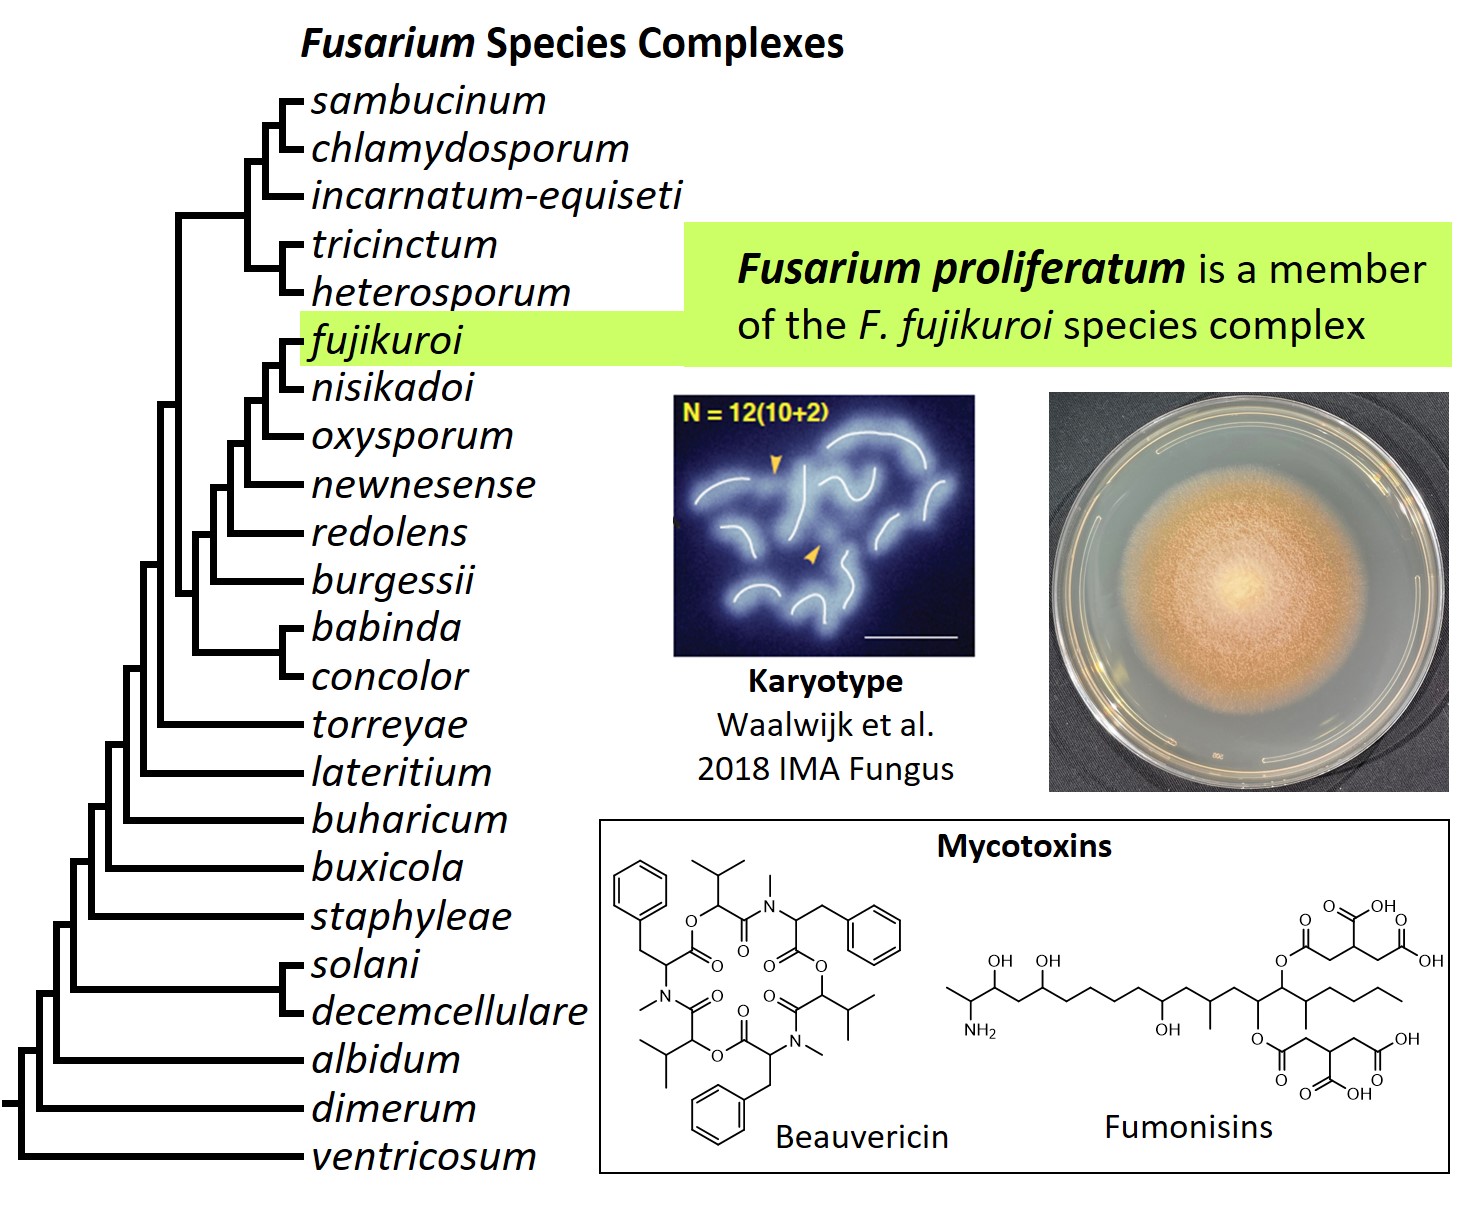 Left &ndash; tree showing phylogenetic relationships of the 23
Fusarium species complexes and placement of F. proliferatum within
the F. fujikuroi species complex. In the tree, species complex
names are abbreviated using specific epithets of the species after
which the complexes are named (e.g., the F. sambucinum species
complex is abbreviated as sambucinum). Middle left &ndash;
karyotype of another strain of F. proliferatum (NRRL 66289). Middle
right &ndash; culture of F. proliferatum ET1 growing on potato
dextrose agar medium. Bottom - chemical structures of beauvericin
and fumonisin B1, two mycotoxins produced by F. proliferatum. Image
credit: Robert H. Proctor, Amy McGovern and Crystal Probyn.